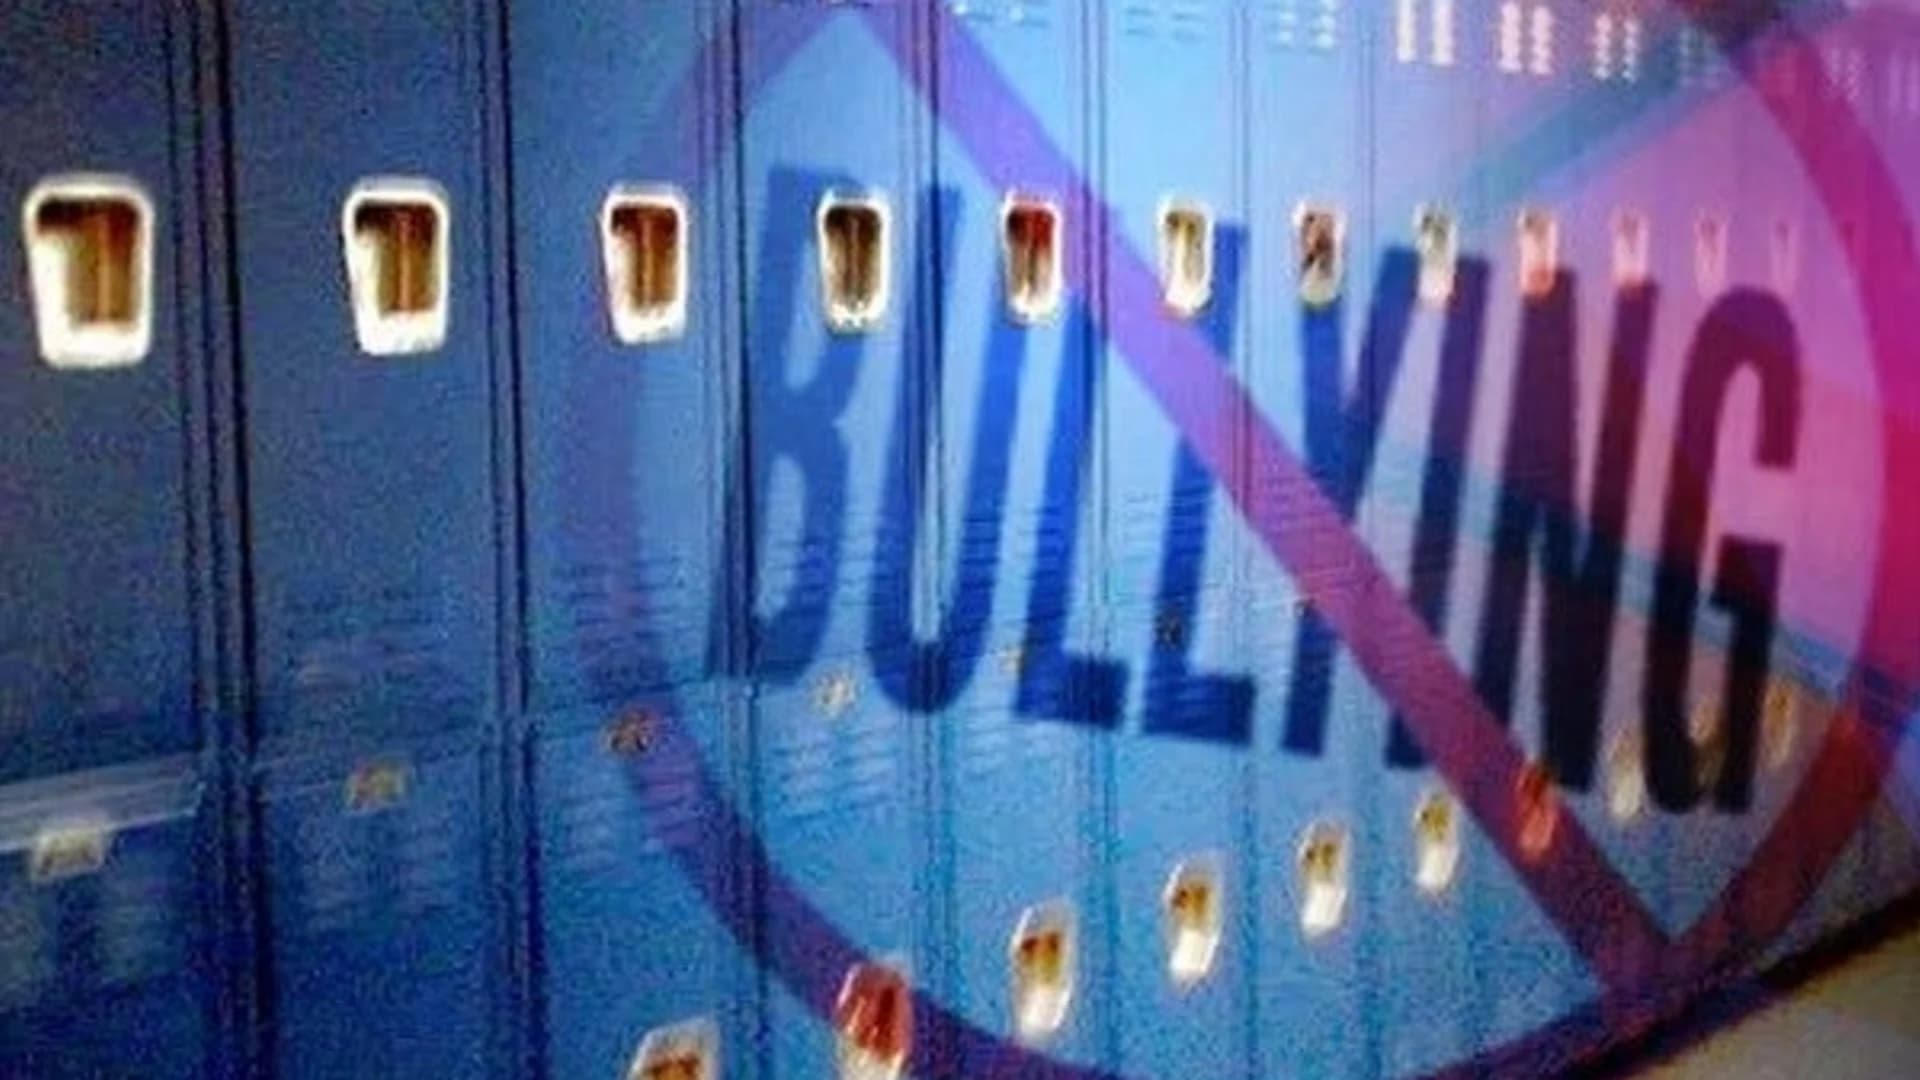 Advocates worry New Jersey bullying law could 'out' LGBT students to parents